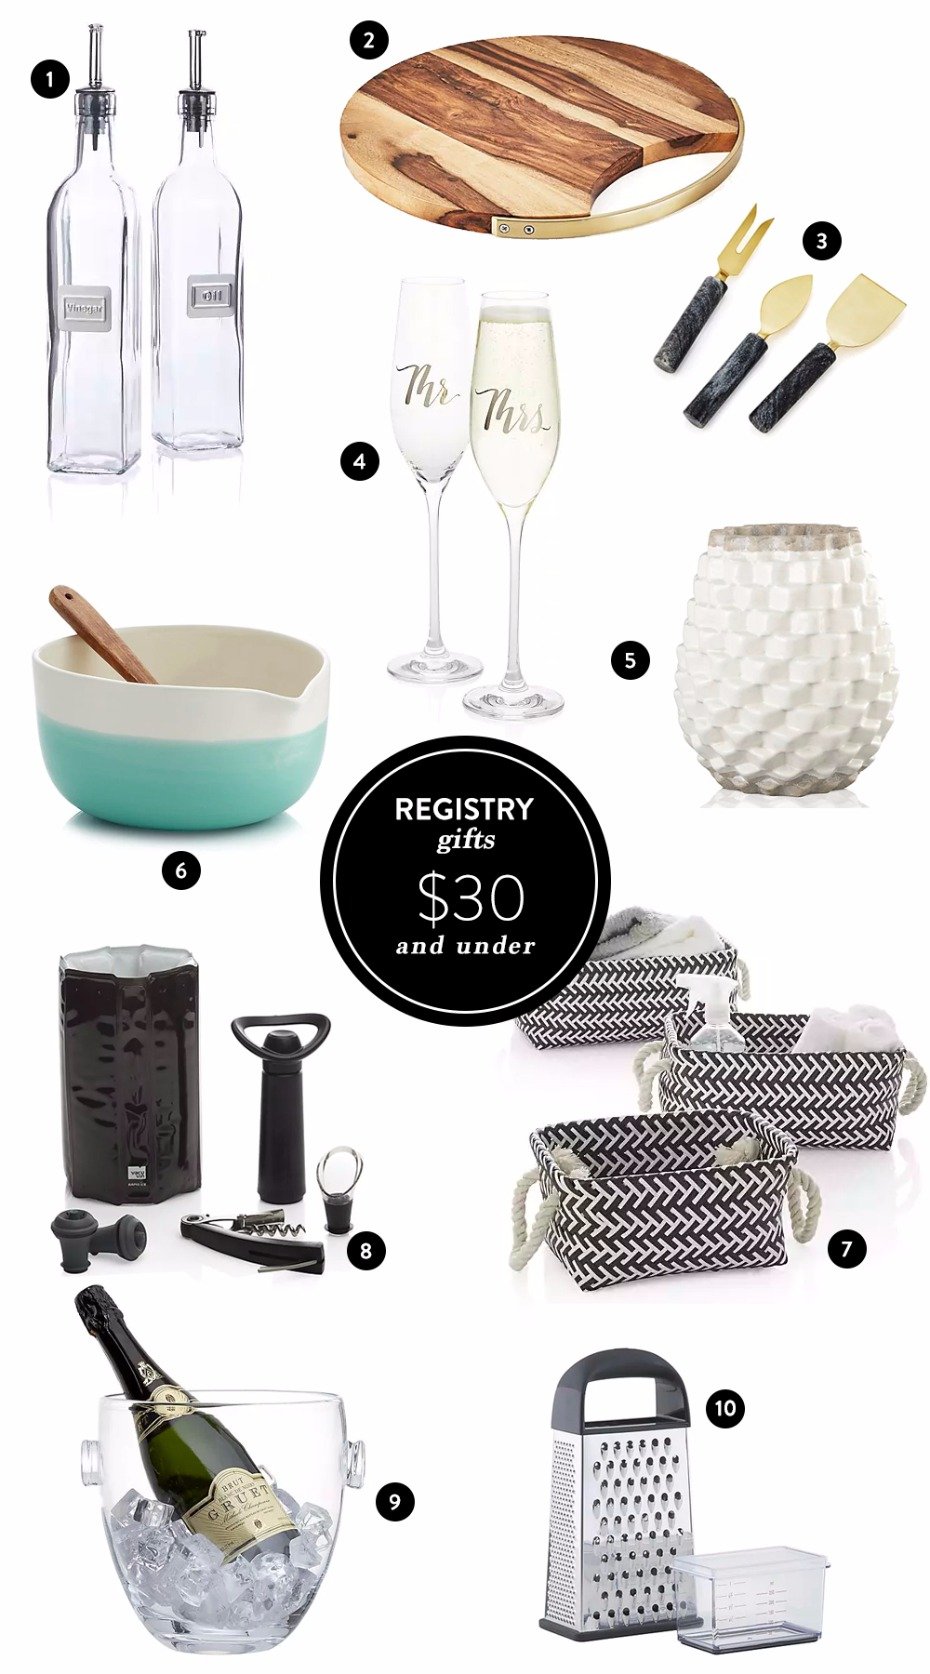 Affordable and special gifts to add to your wedding registry